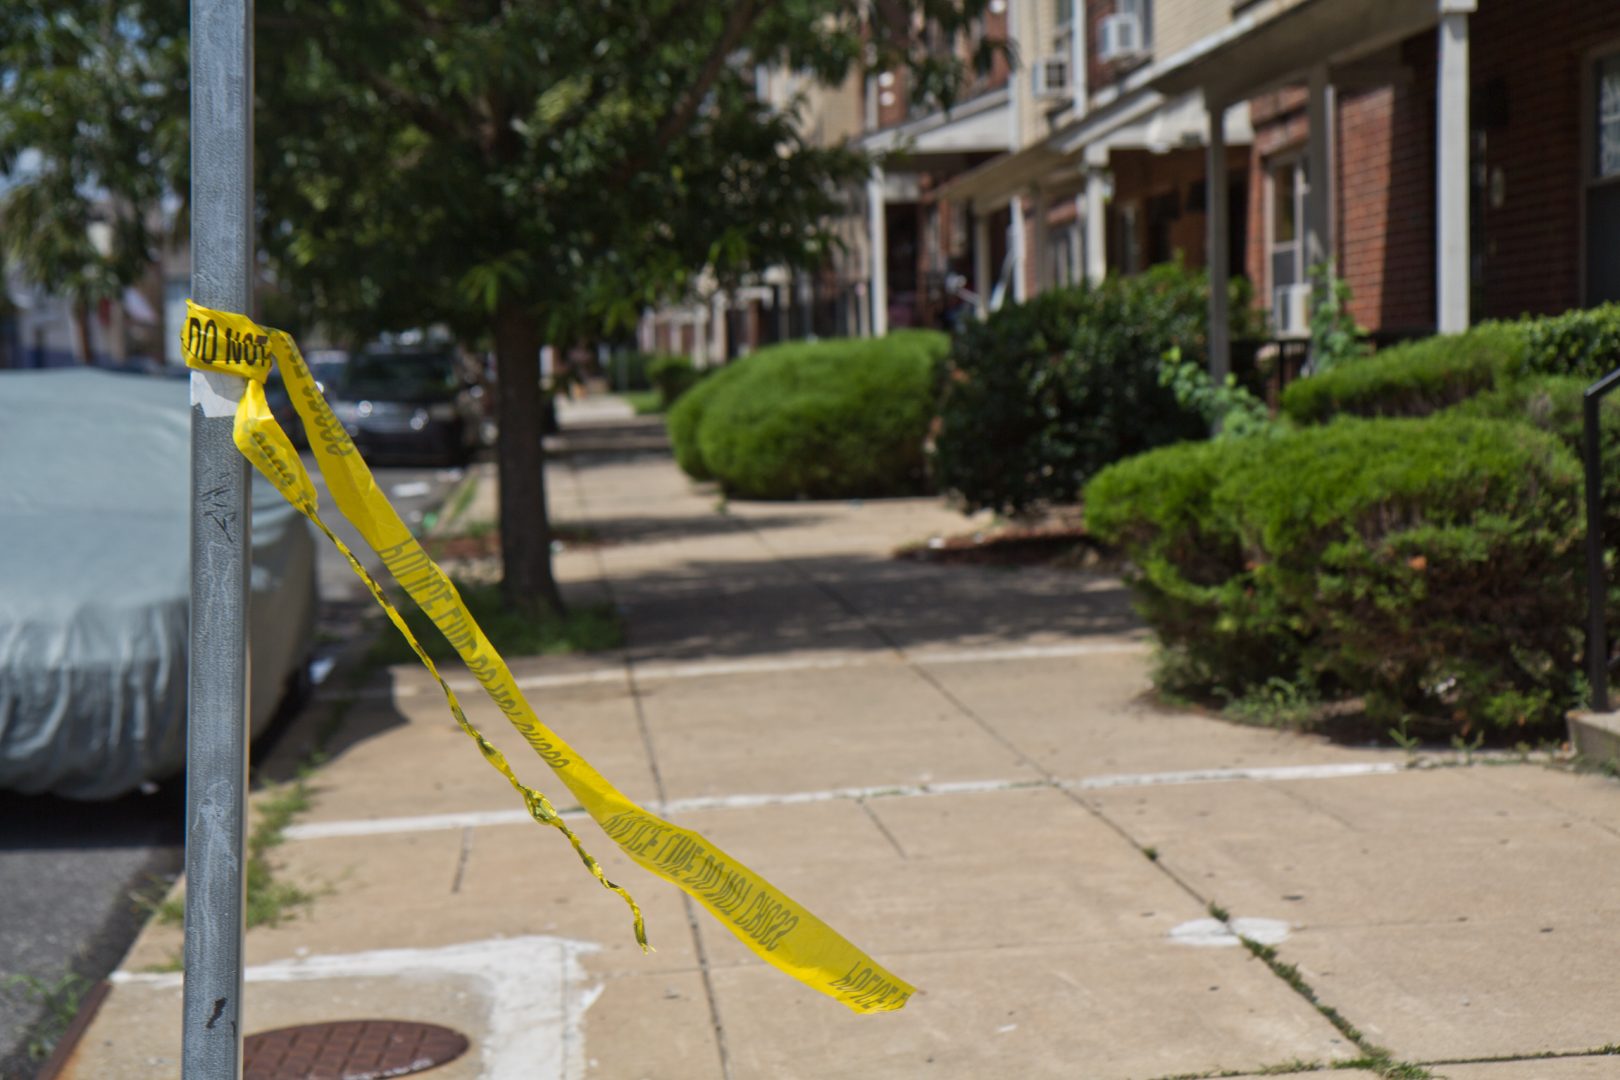 Remnants of crime scene tape on Brown Street in North Philadelphia where 5 were wounded in a shooting at a block party Saturday night. (Kimberly Paynter/WHYY)